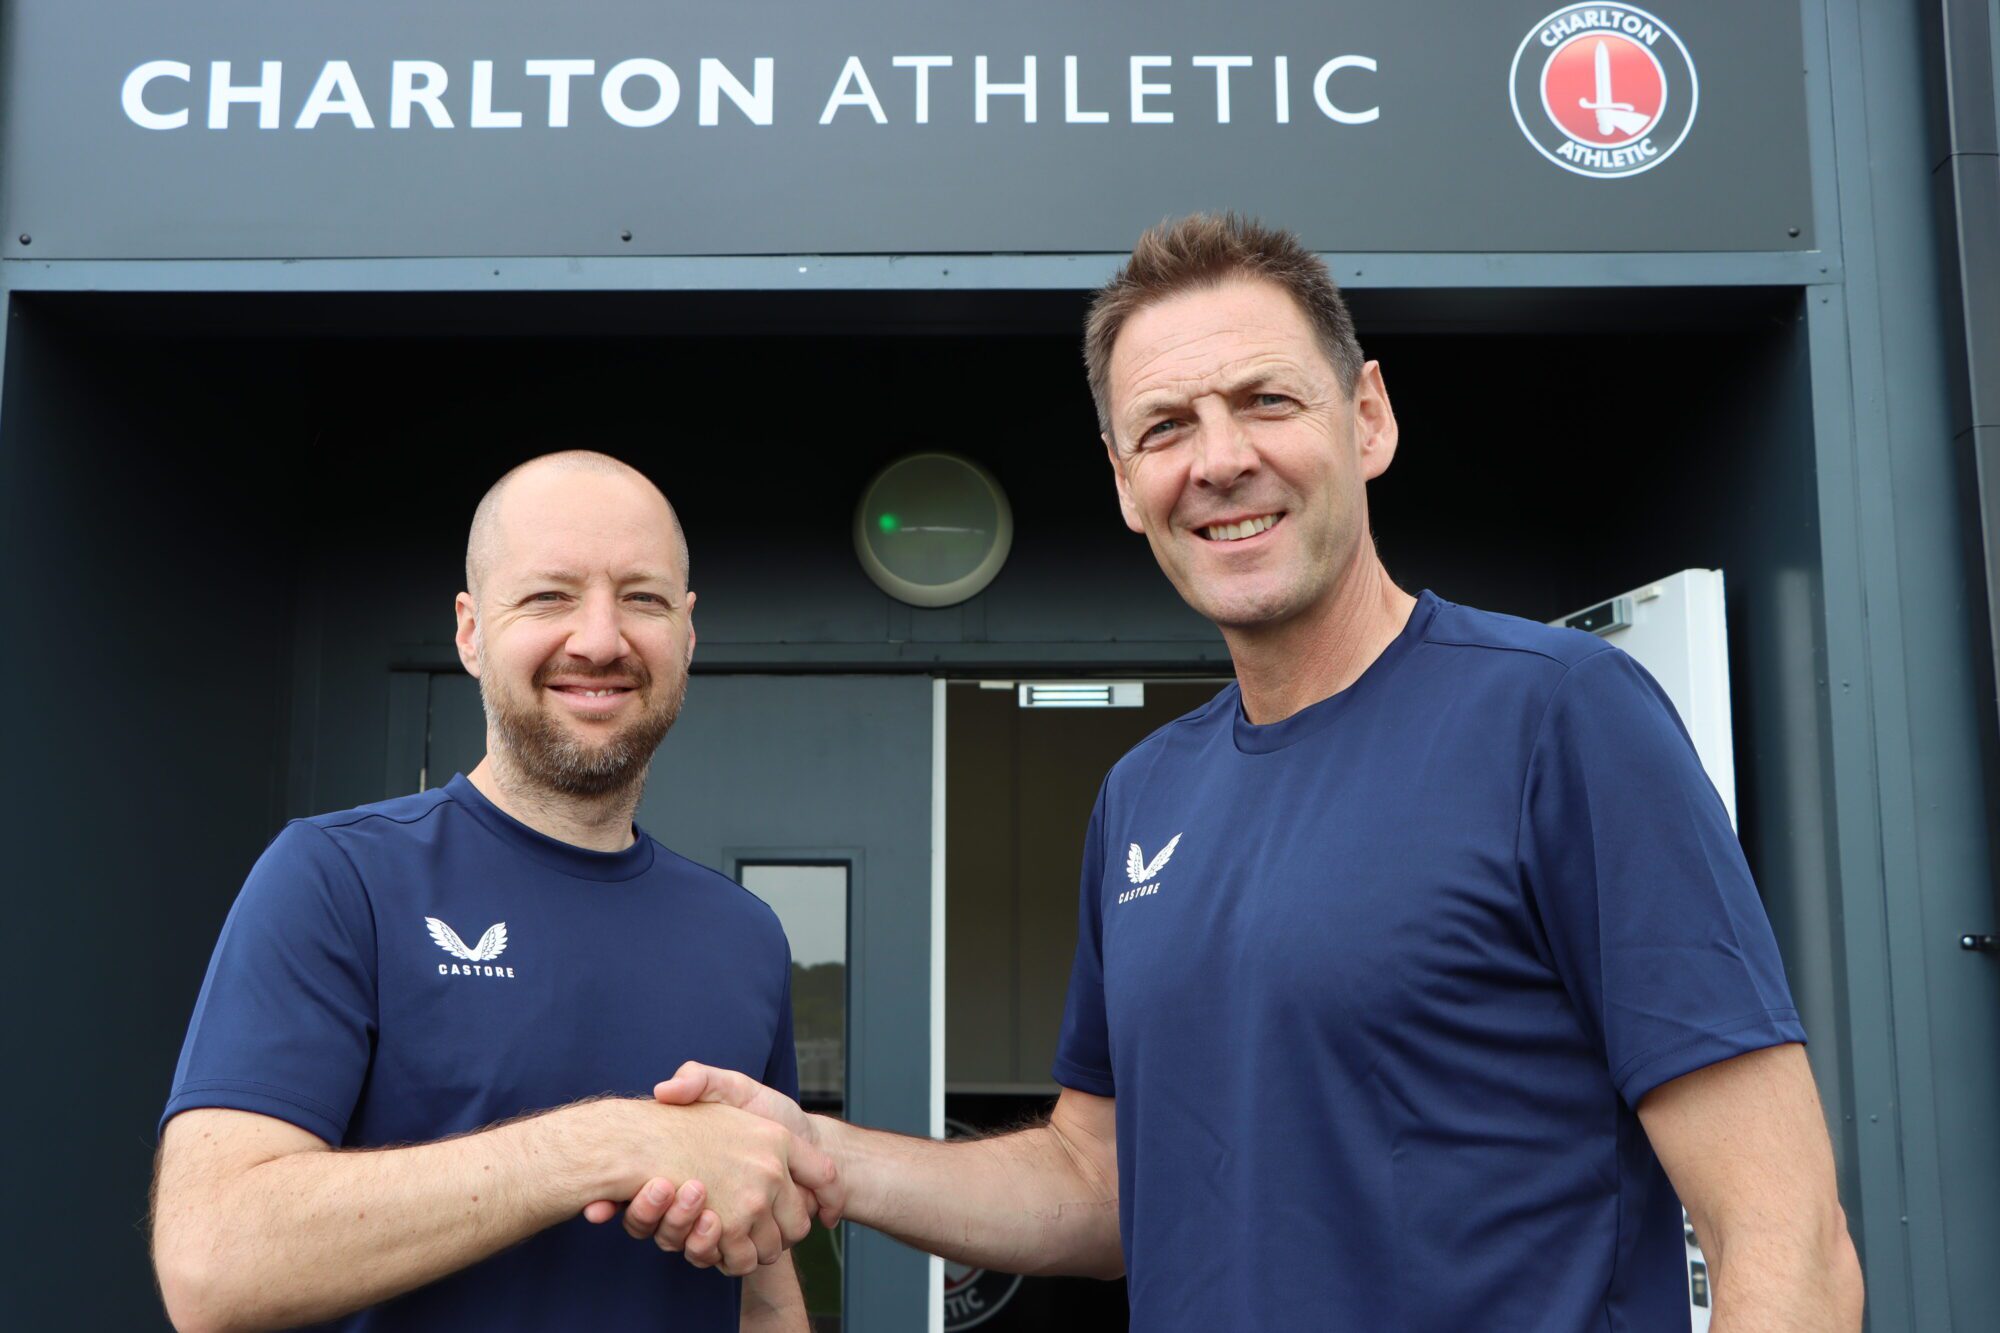 Charlton Athletic appoint Scott Marshall as first-team assistant coach – South London News